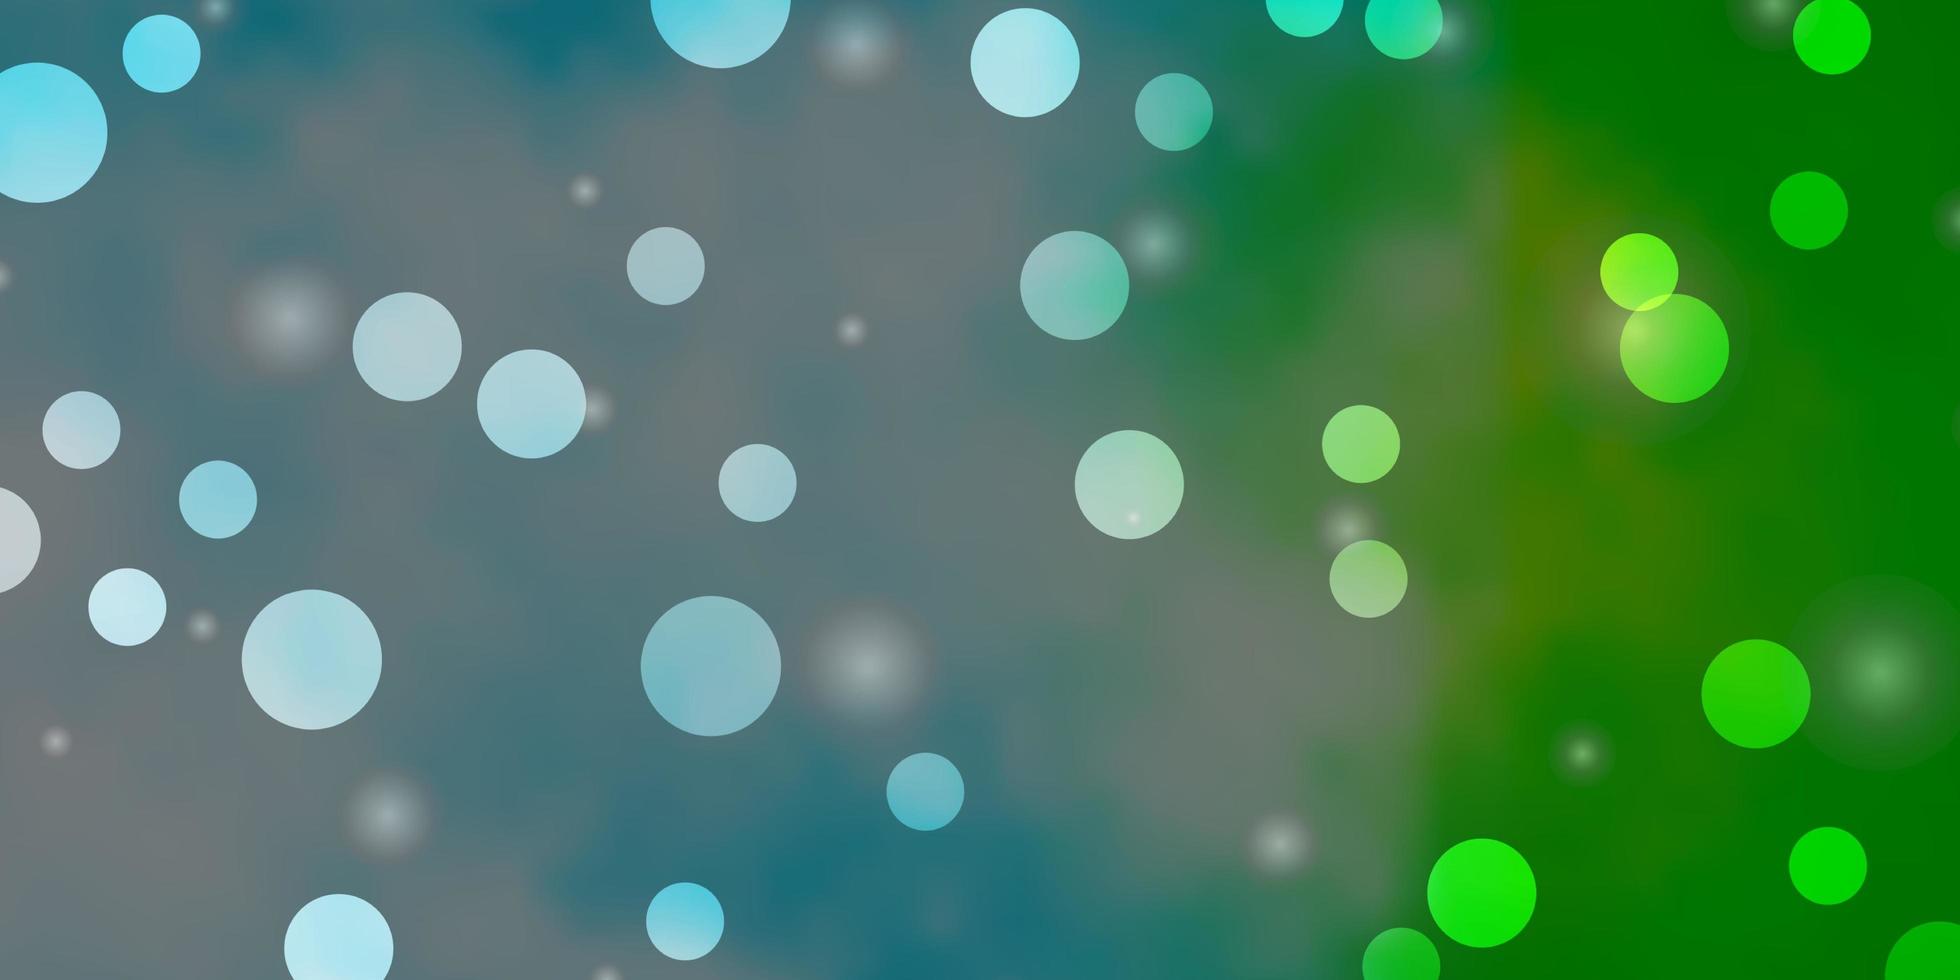 Light Blue, Green vector backdrop with circles, stars. Illustration with set of colorful abstract spheres, stars. Design for posters, banners.